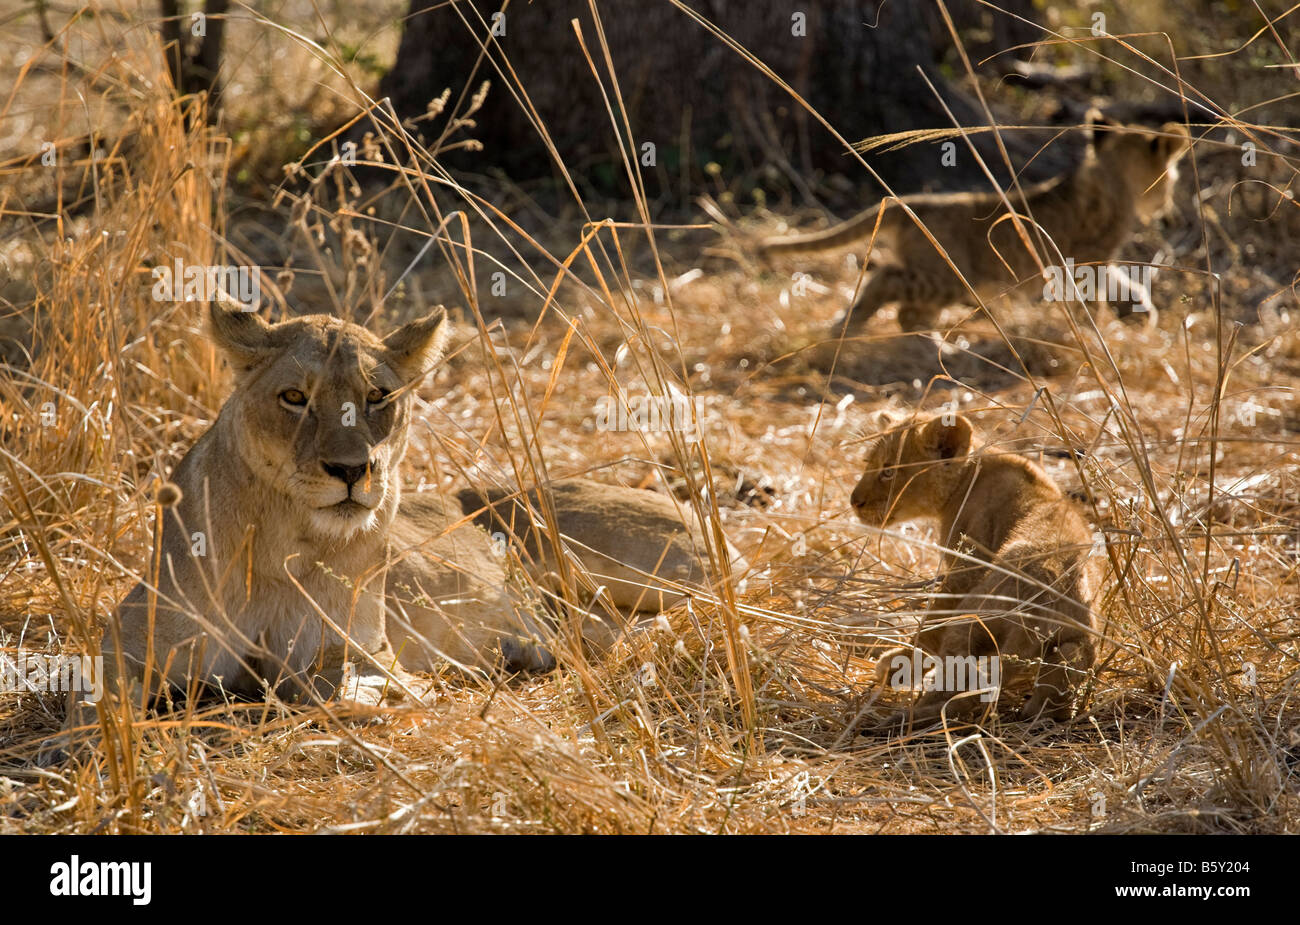 Lions at South Luangwa National Park in Zambia Stock Photo